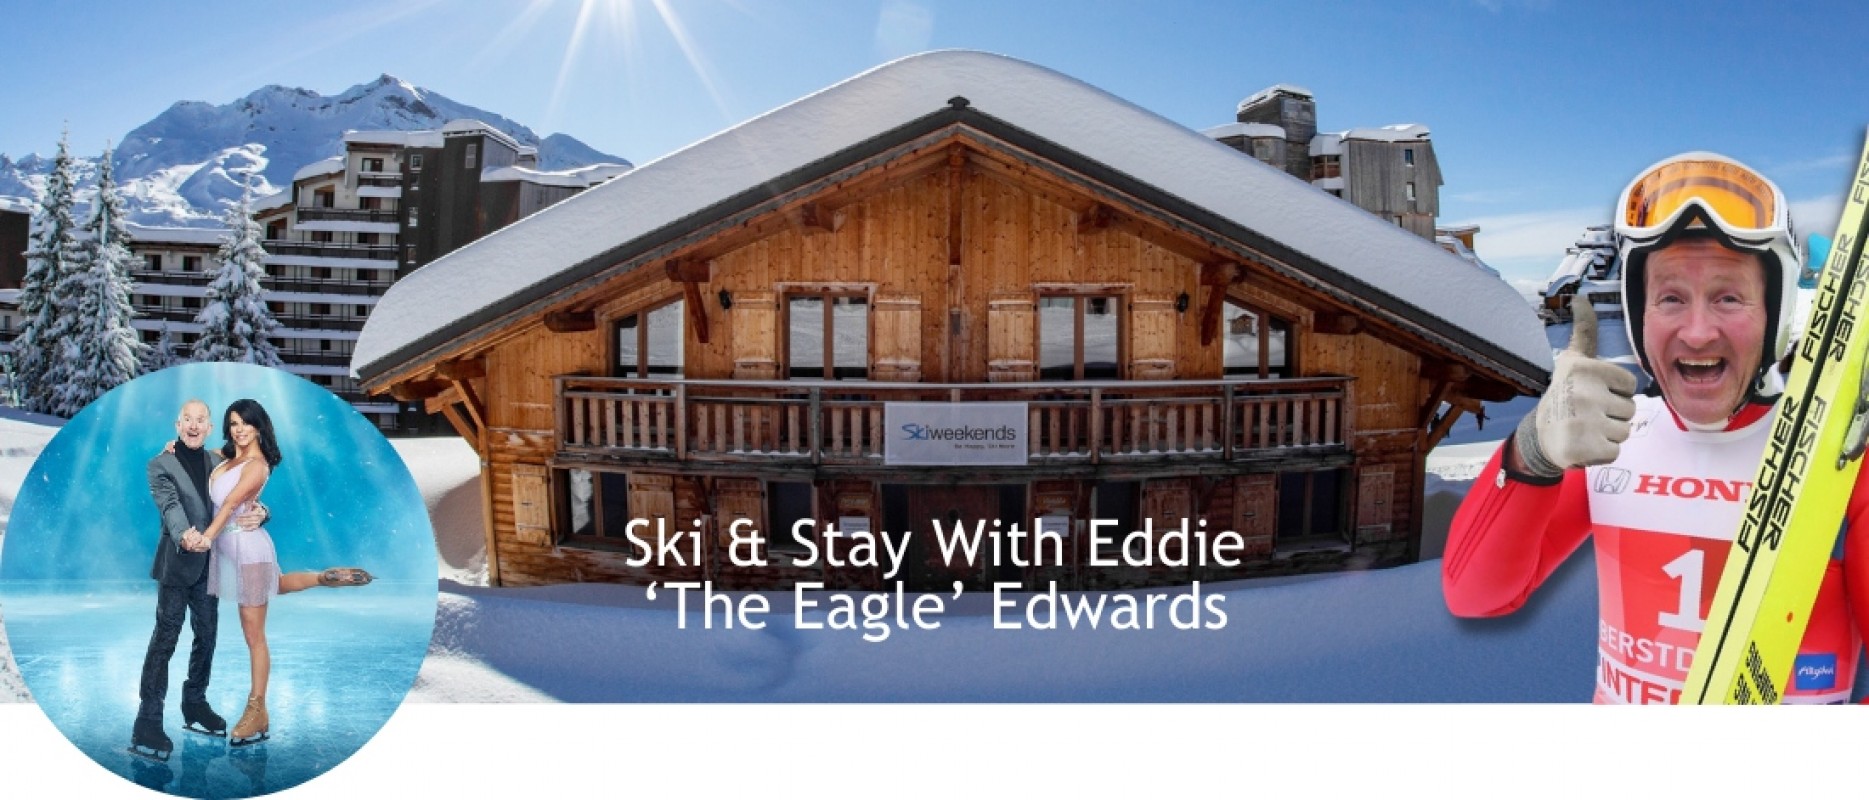 Ski With Eddie the Eagle Edwards - Dancing On Ice Star